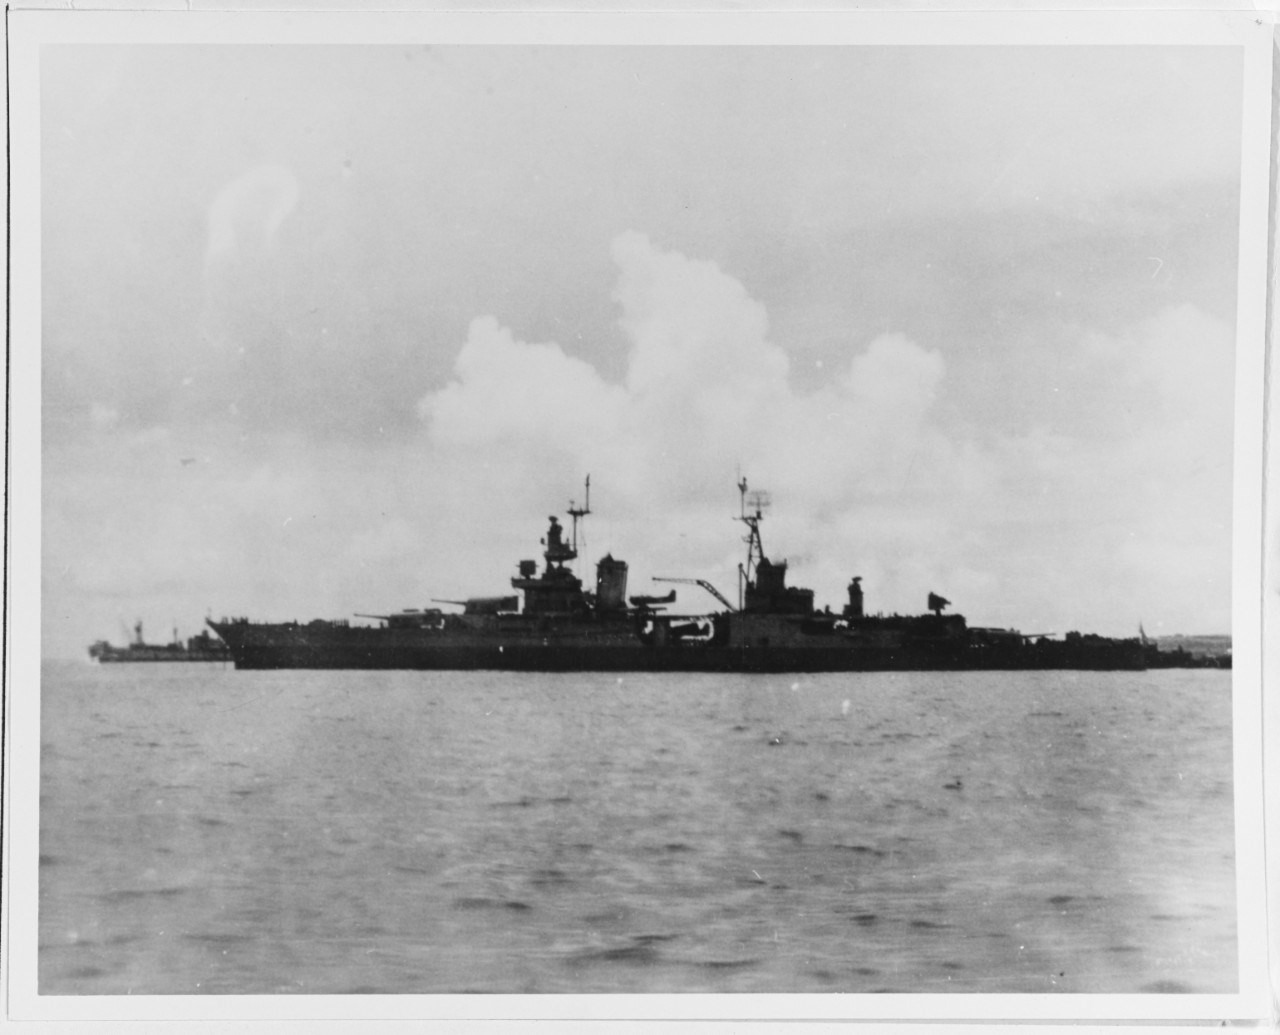 Silhouette of navy heavy cruiser USS Indianapolis floating on the ocean.